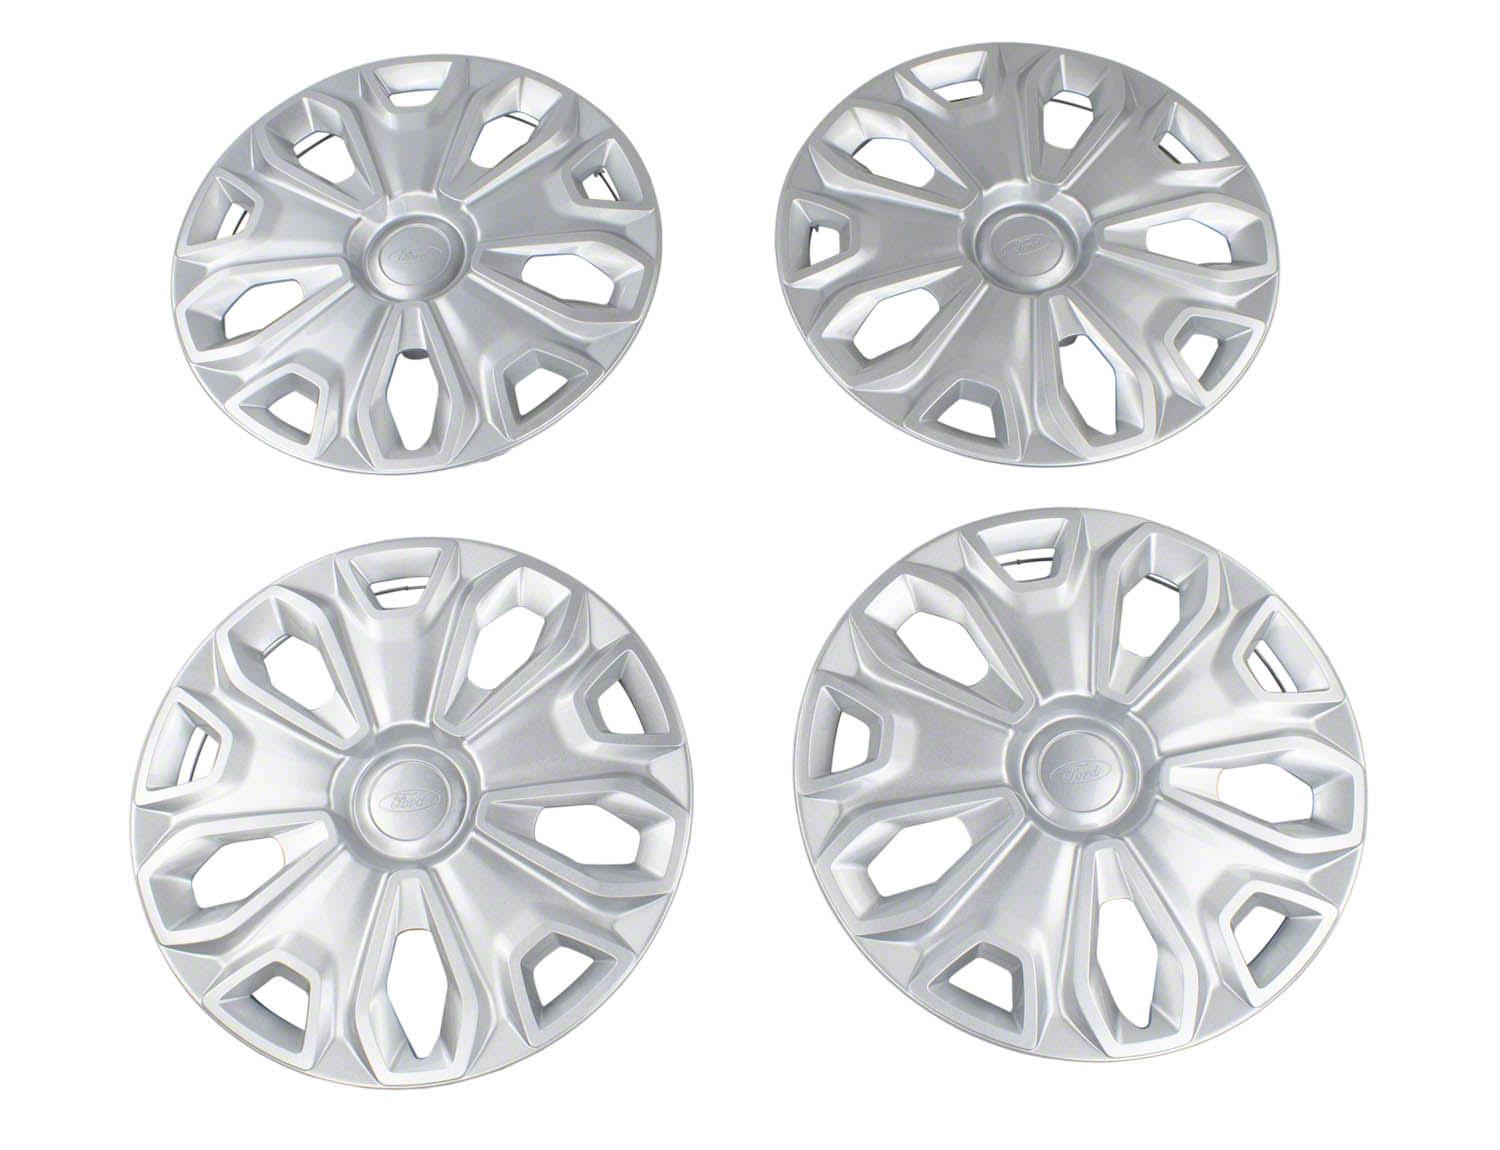 16 Inch Silver Wheel Cover Set, Shop Today. Get it Tomorrow!